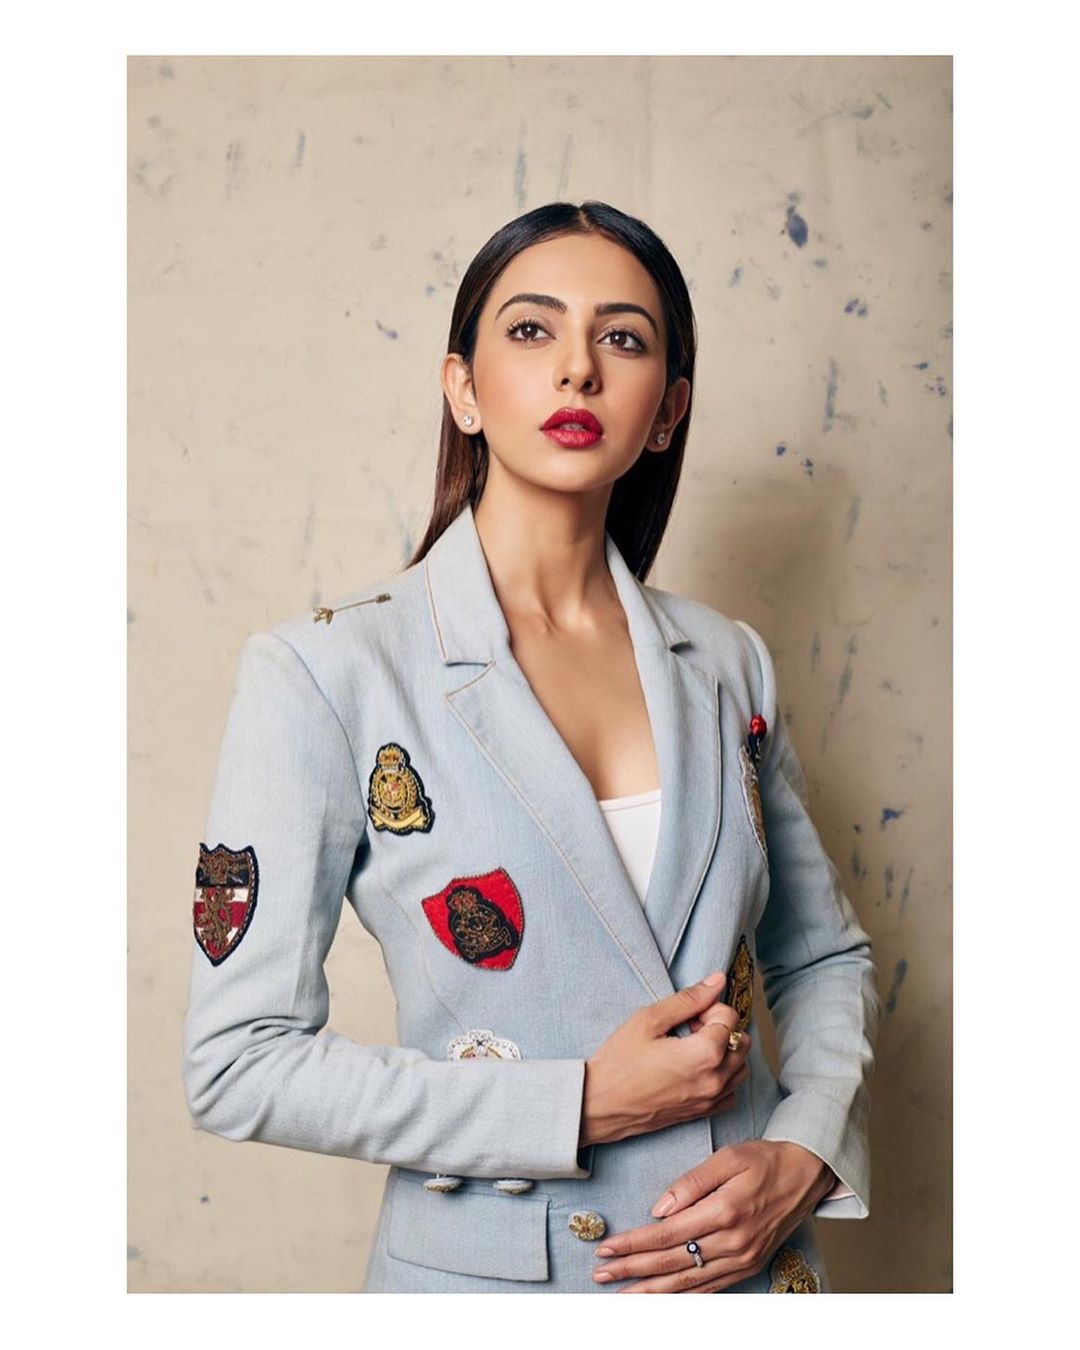 Rakul Preet In A Funky Coat While Posting For A Photo Shoot